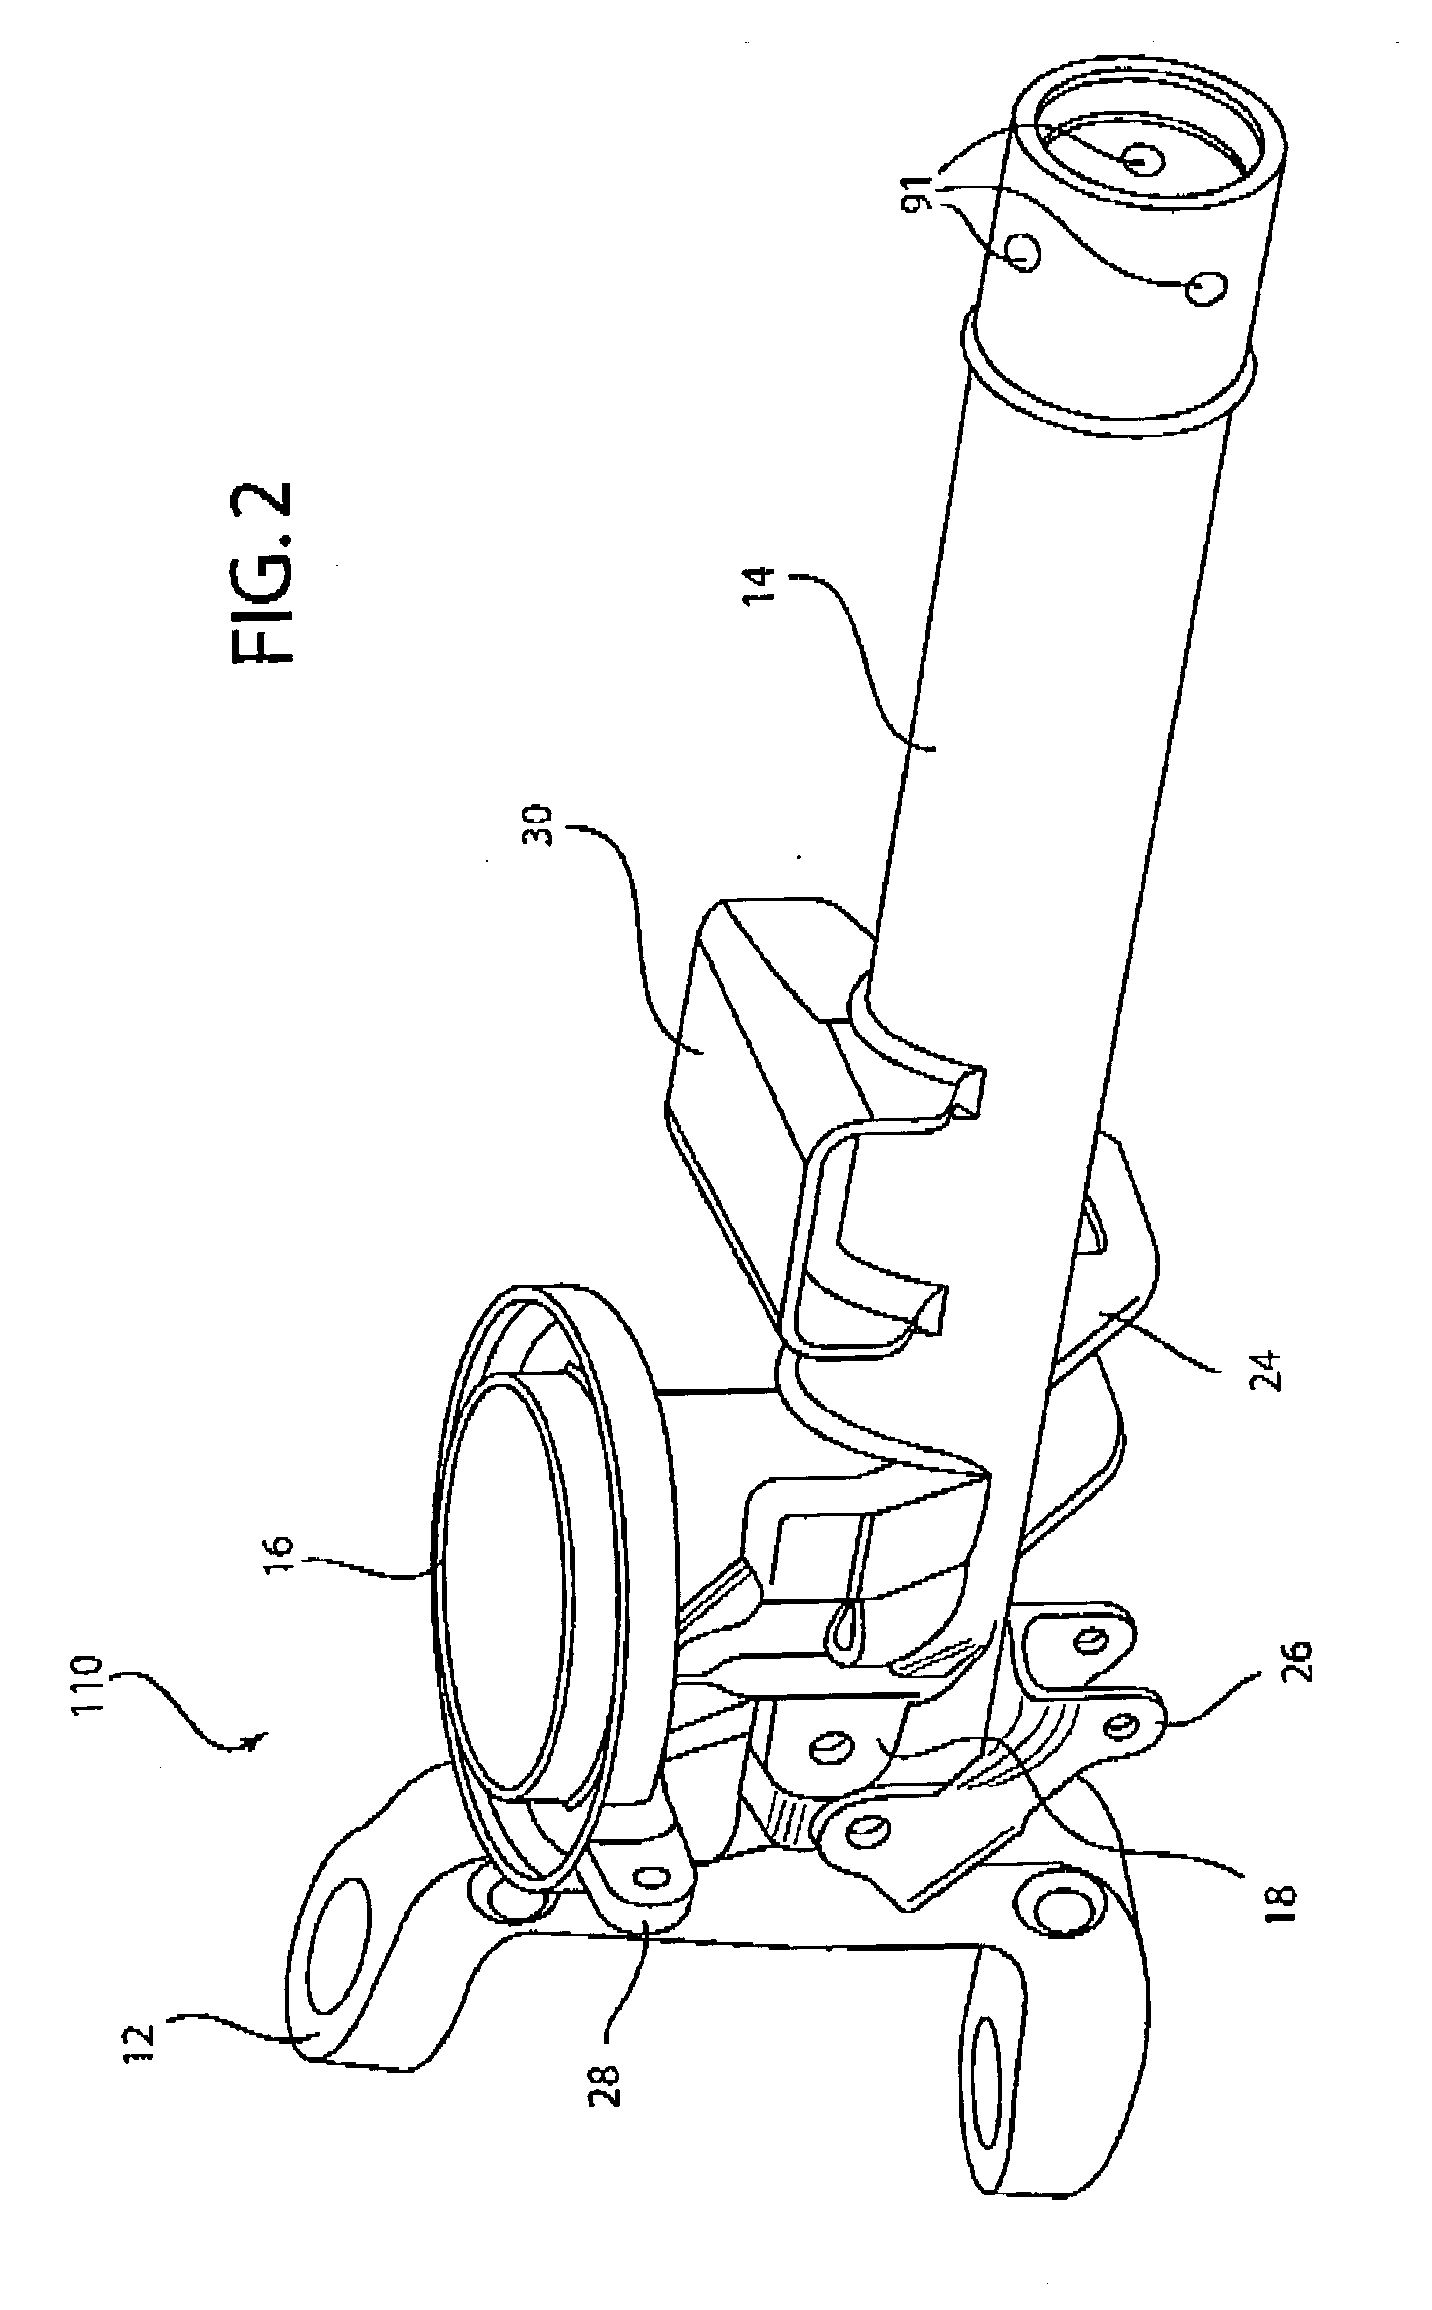 Axle assembly